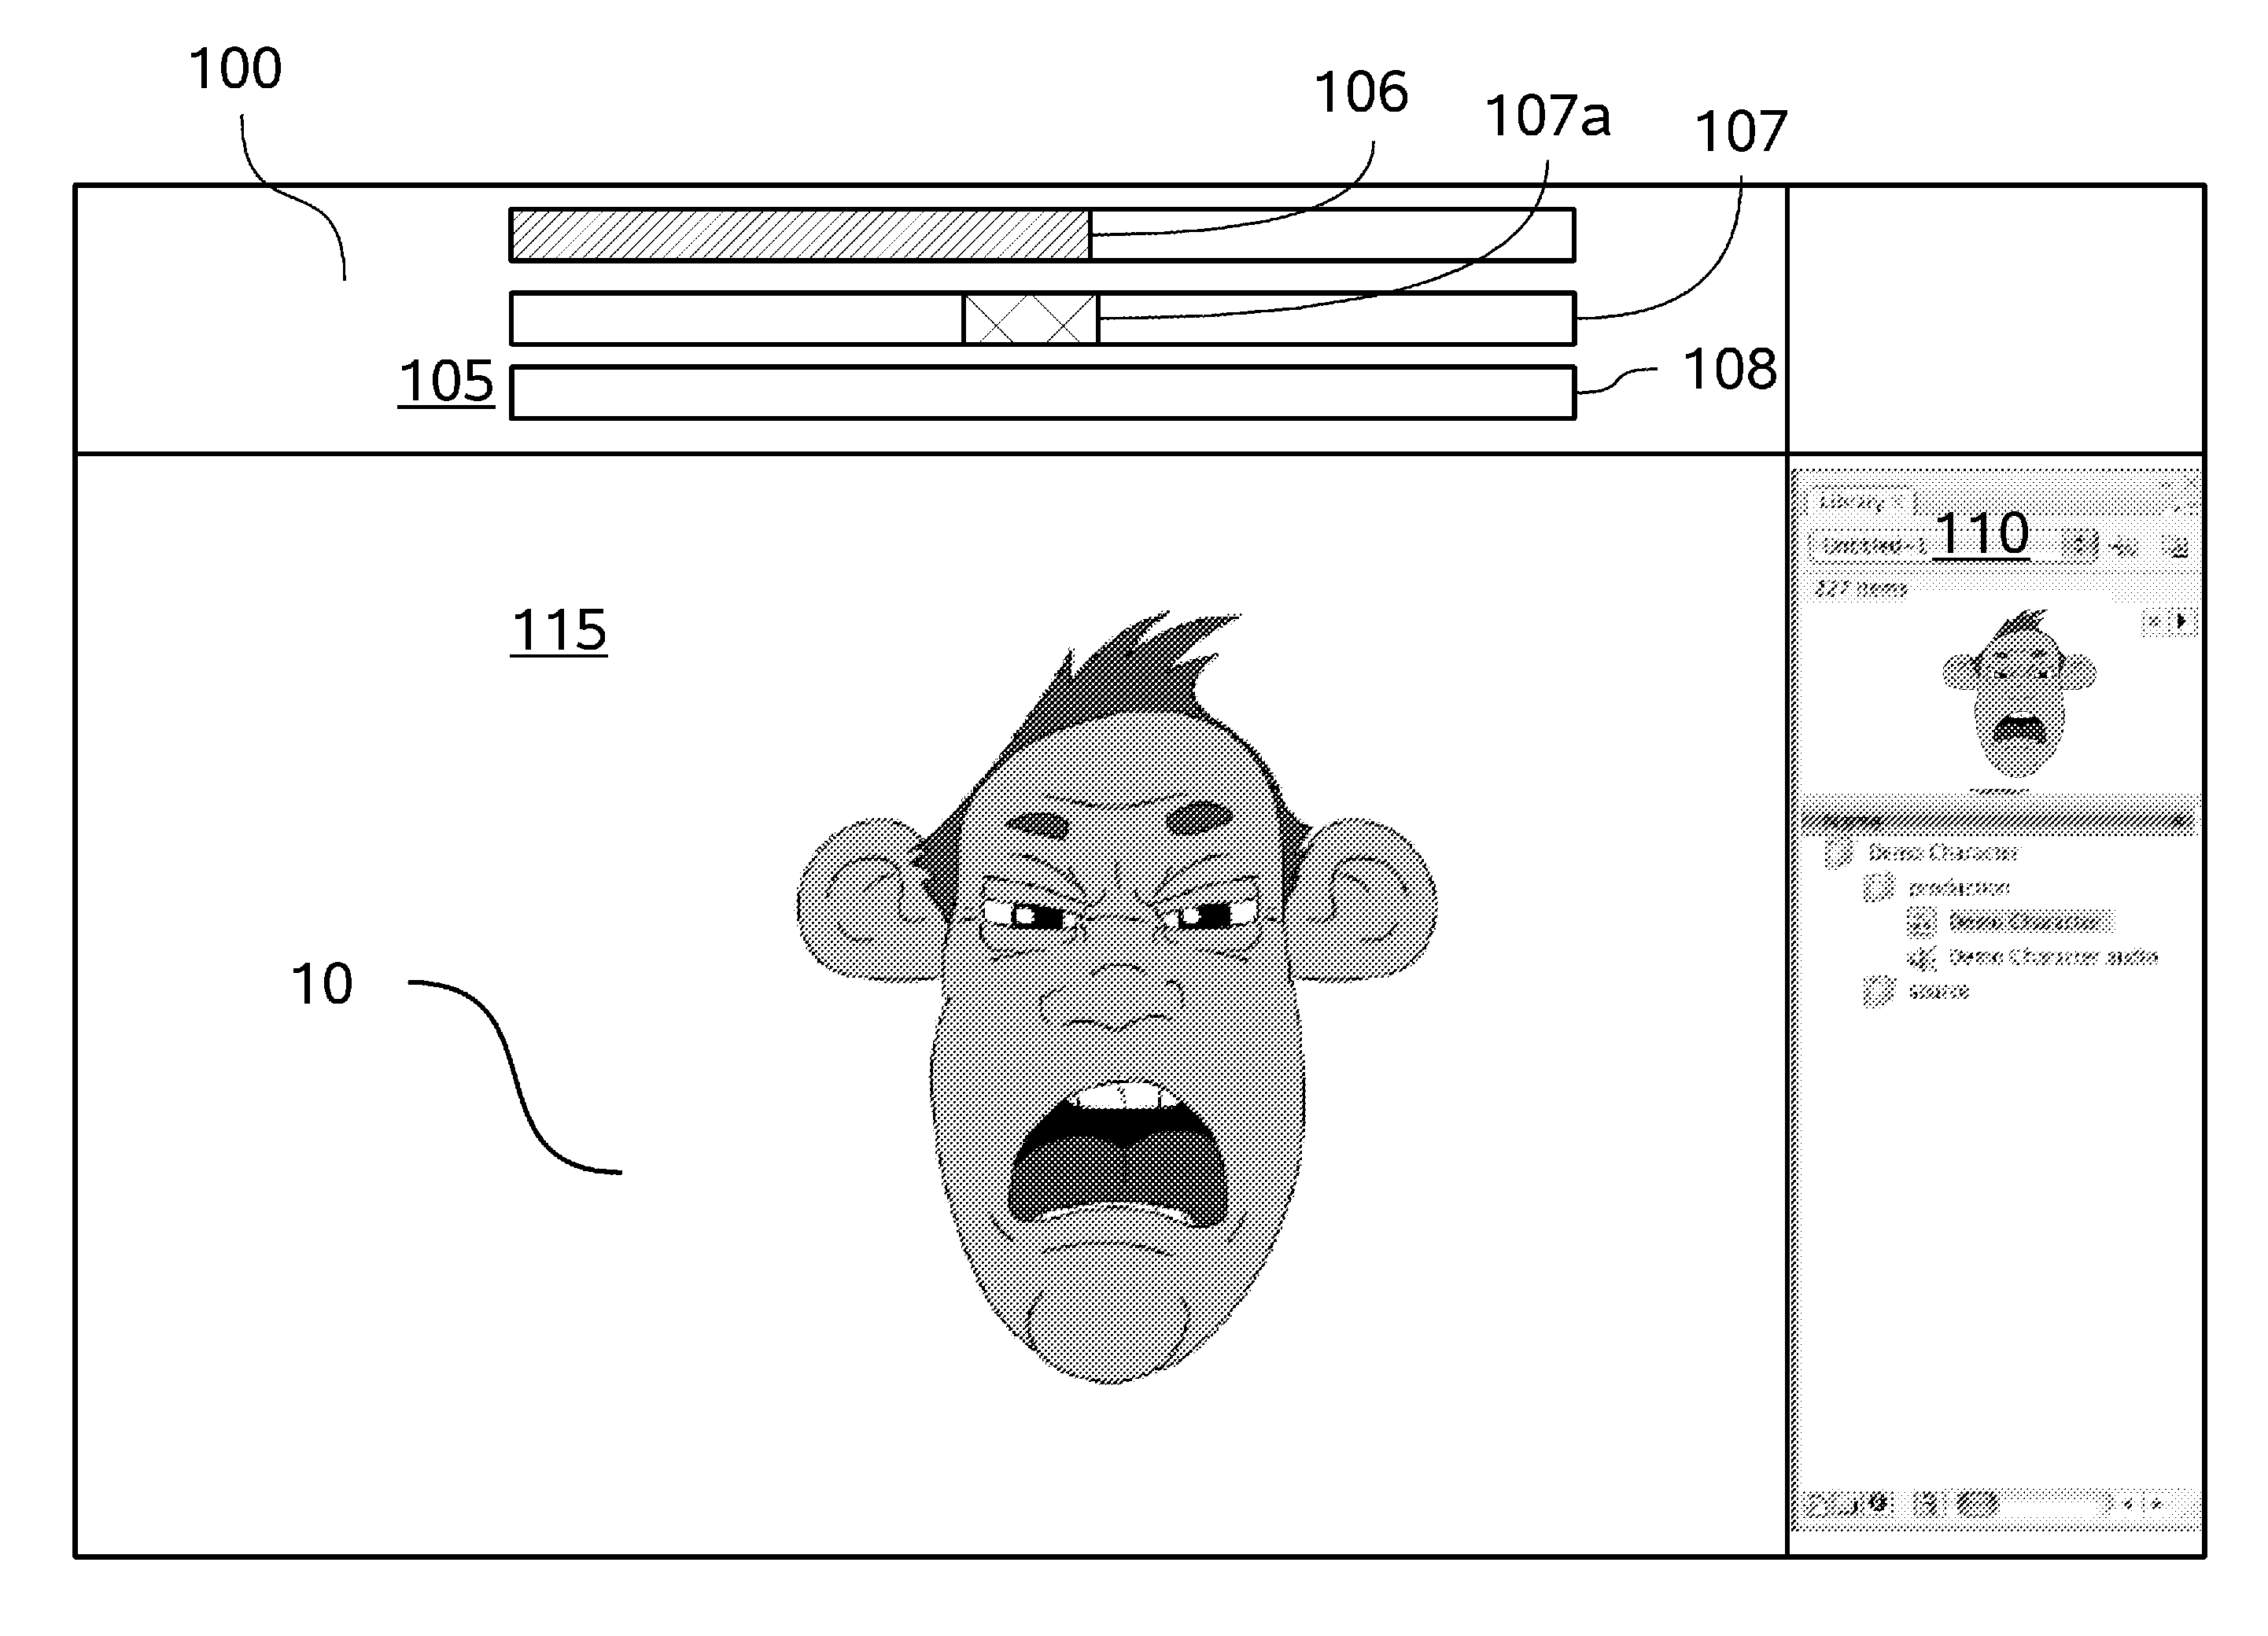 Method and Apparatus for Character Animation